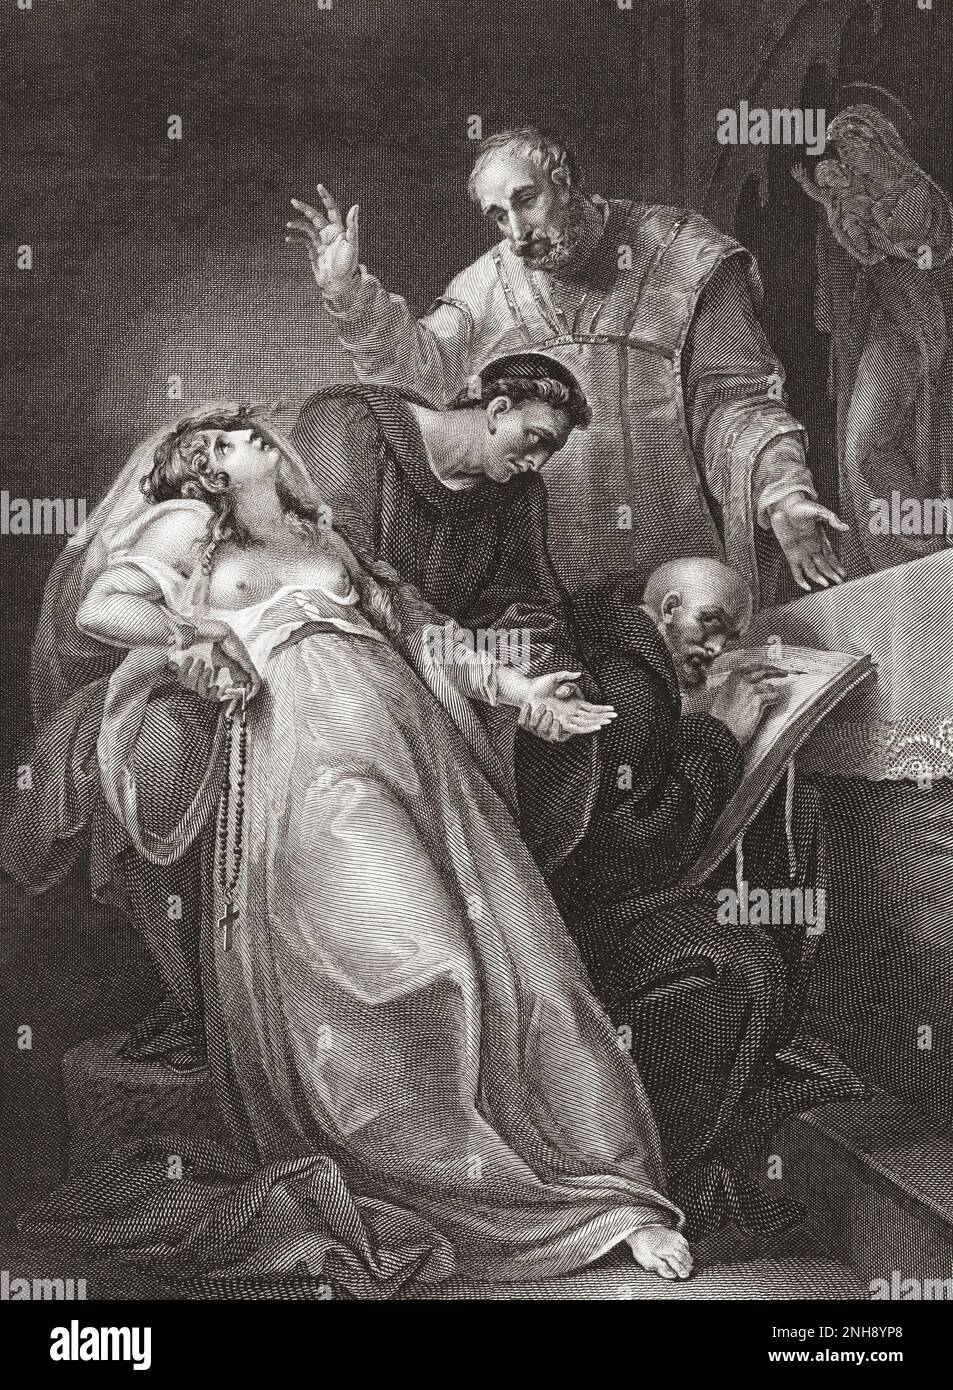 The Imposture of the Holy Maid of Kent.   Elizabeth Barton 1506 - 1534,  known as The Holy Maid of Kent, prophesied against  King Henry VIII's marriage to Anne Boleyn and was executed for it.  After a print by Isaac Taylor and George Vincent after the work by Henry Tresham originally featured in Robert Bowyer's Historic Gallery, published between 1793 and 1806. Stock Photo